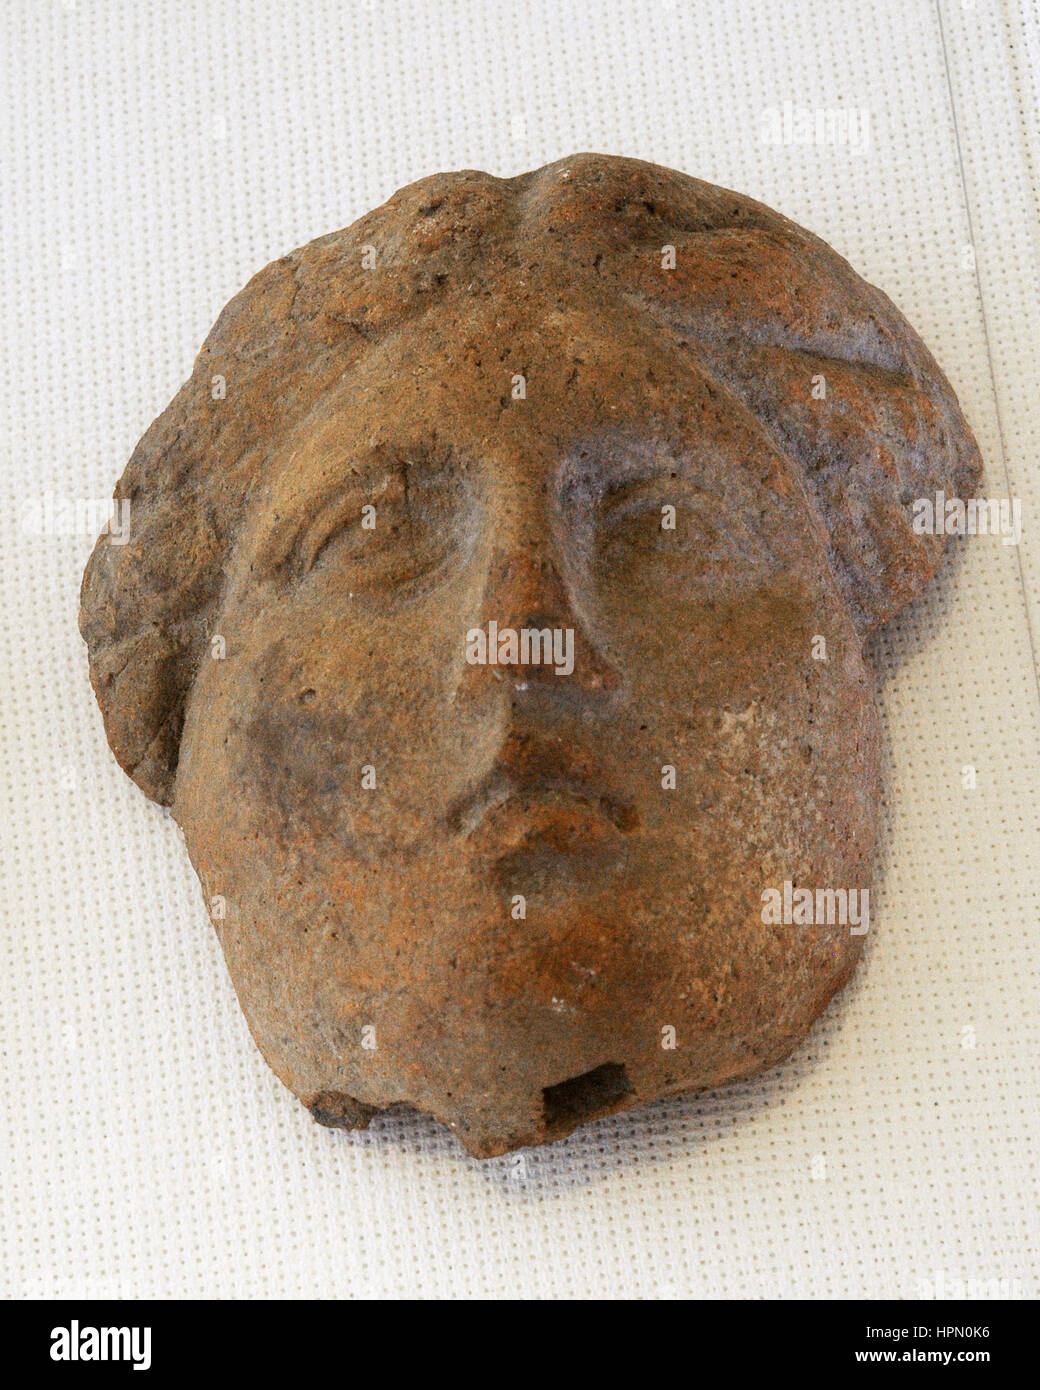 Roman antefix. Vertical block which terminates the covering tiles of the roof. Moulded ceramic. Head of classic. Apparenty feminine with tufts and braids. 1st century BC-1st century BC. Spain. Terracotta. National Archaeological Museum. Tarragona. Catalonia, Spain. Stock Photo